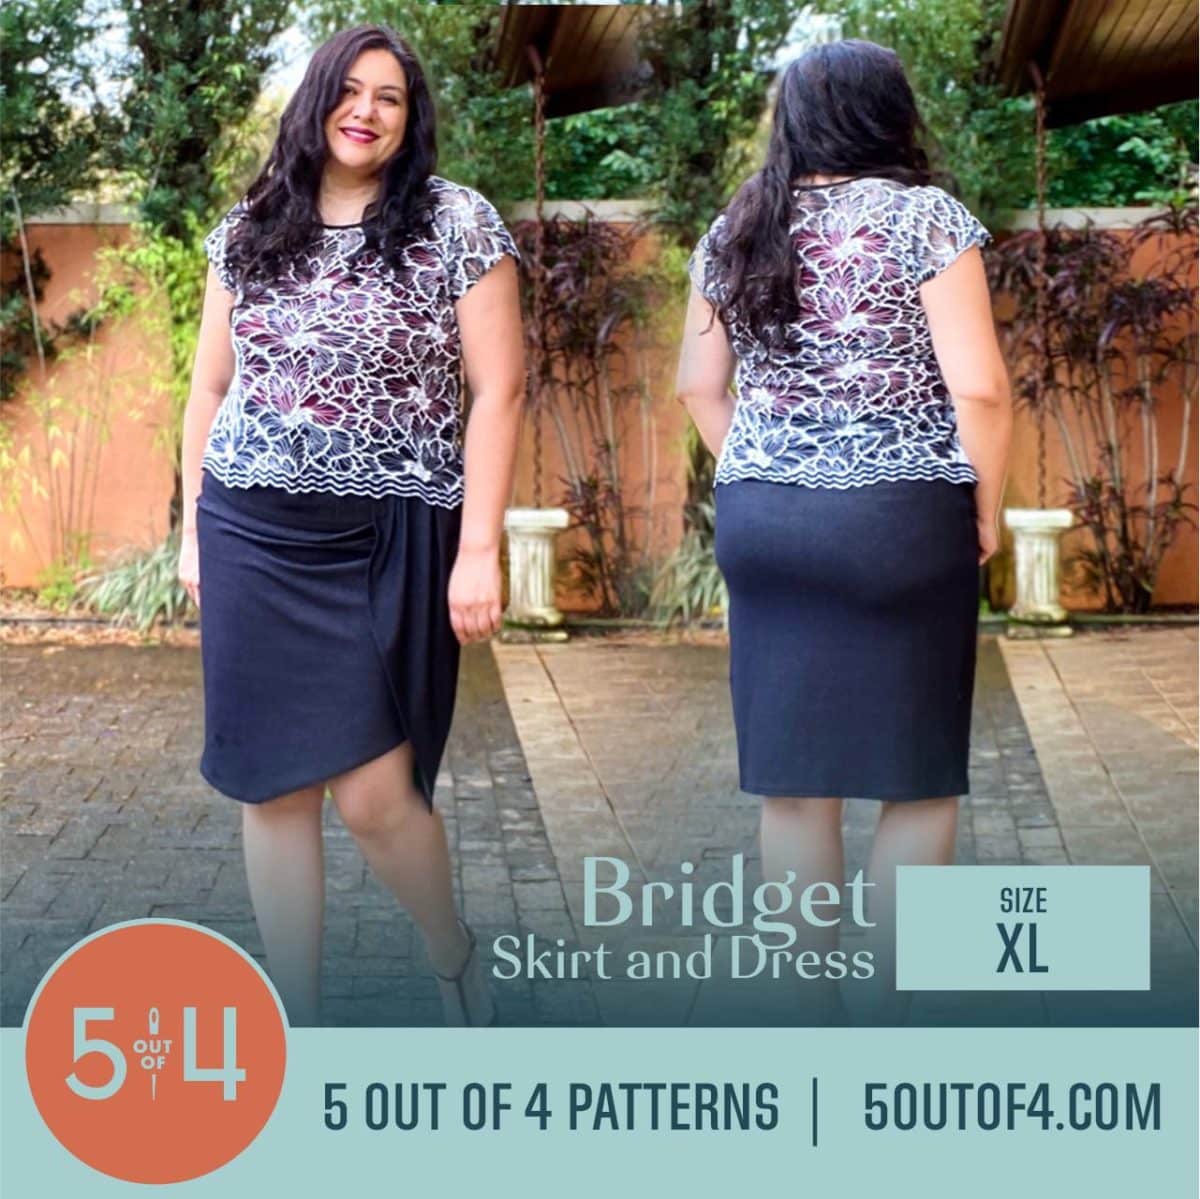 Bridget Skirt and Dress - 5 out of 4 Patterns